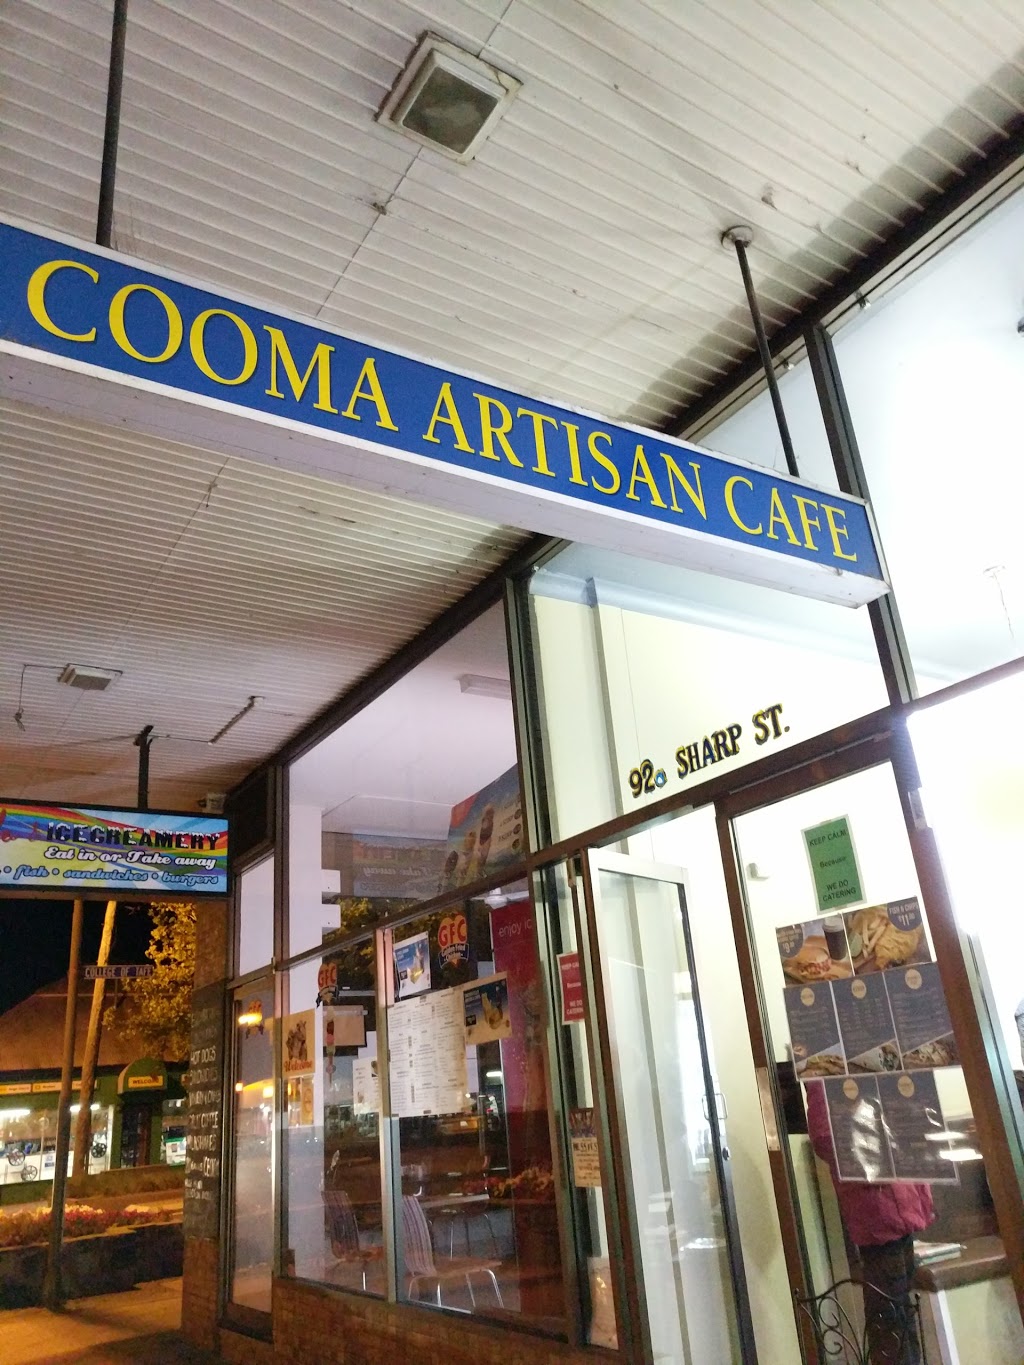 Cooma Artisan Cafe | cafe | 92A Sharp St, Cooma NSW 2630, Australia | 0422838653 OR +61 422 838 653